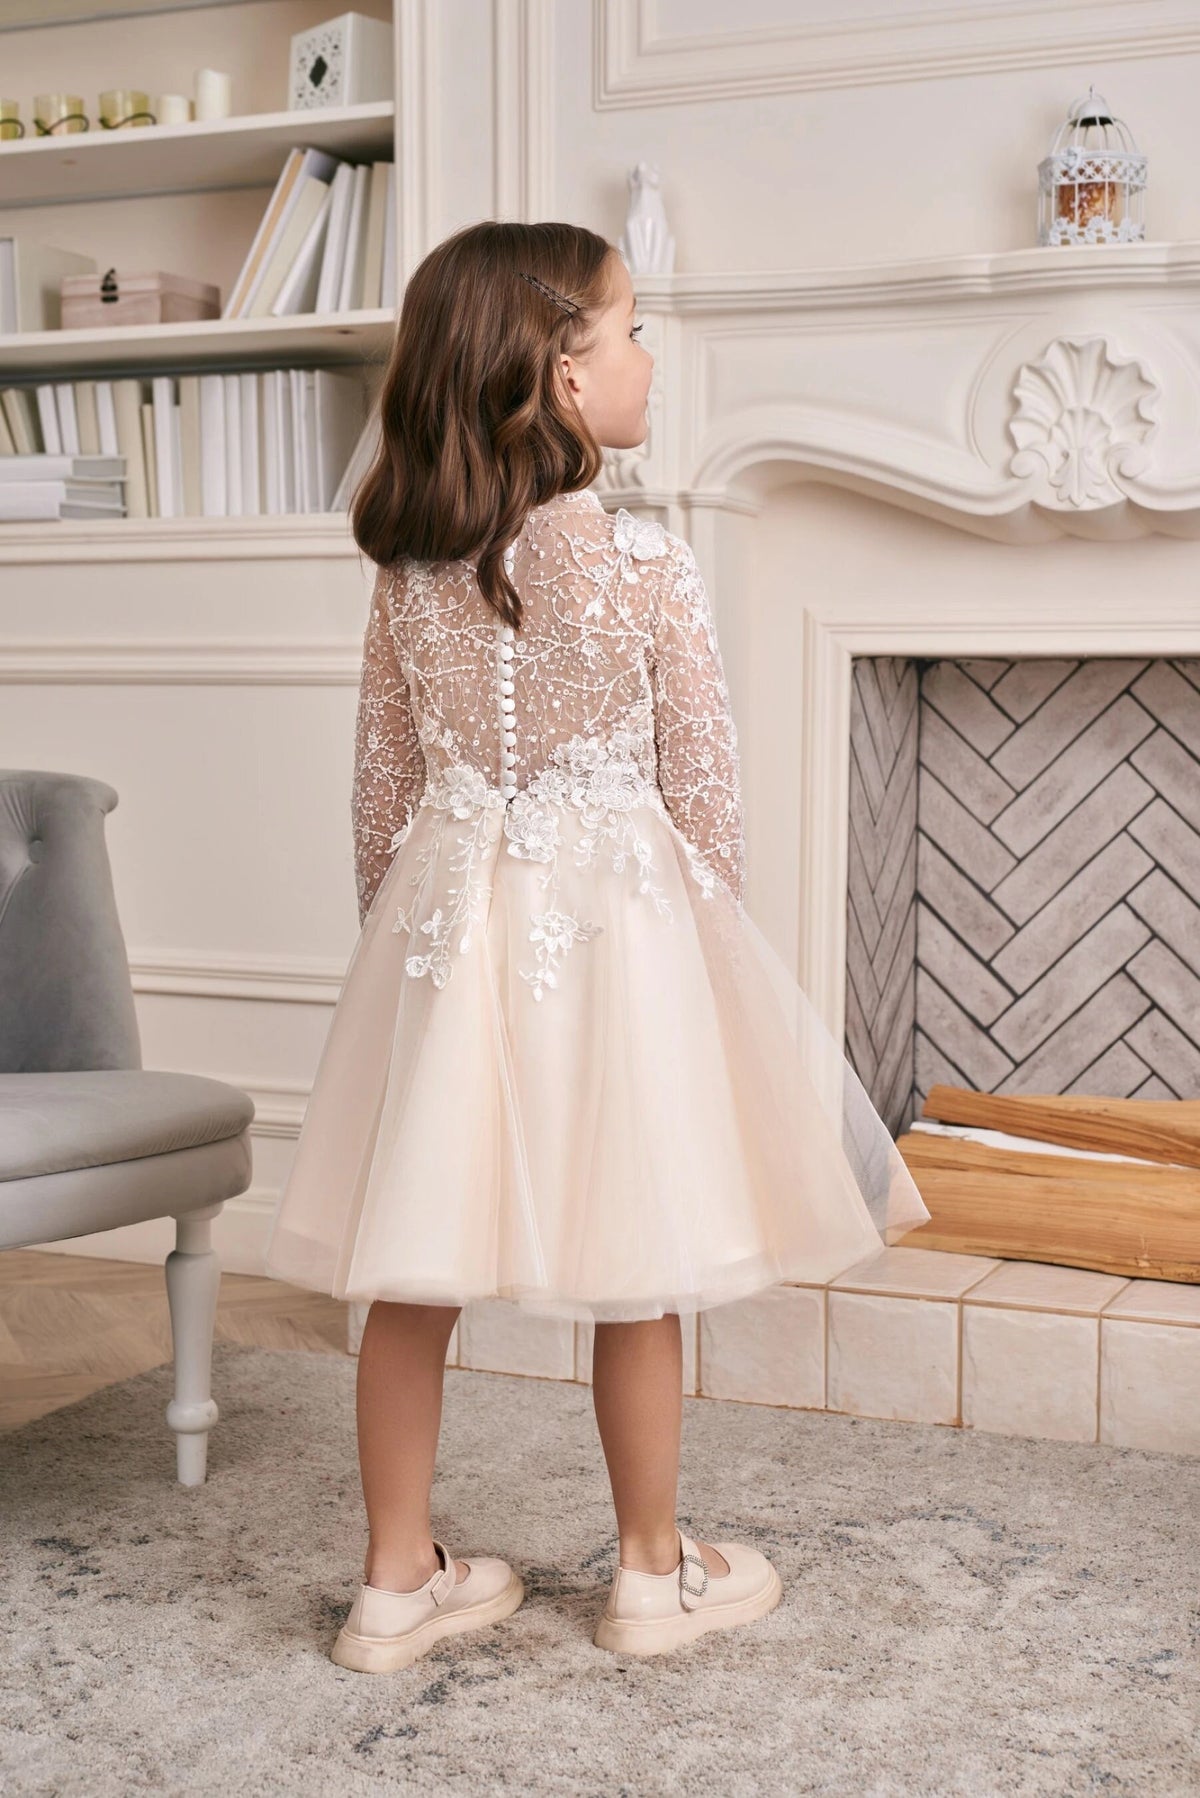 Delicate Aline Long Illusion Sleeves Embroidered Flowers Semi Transparent Bodice High Neckline High Collar Wedding Dress Bridal Gown 3D Lace